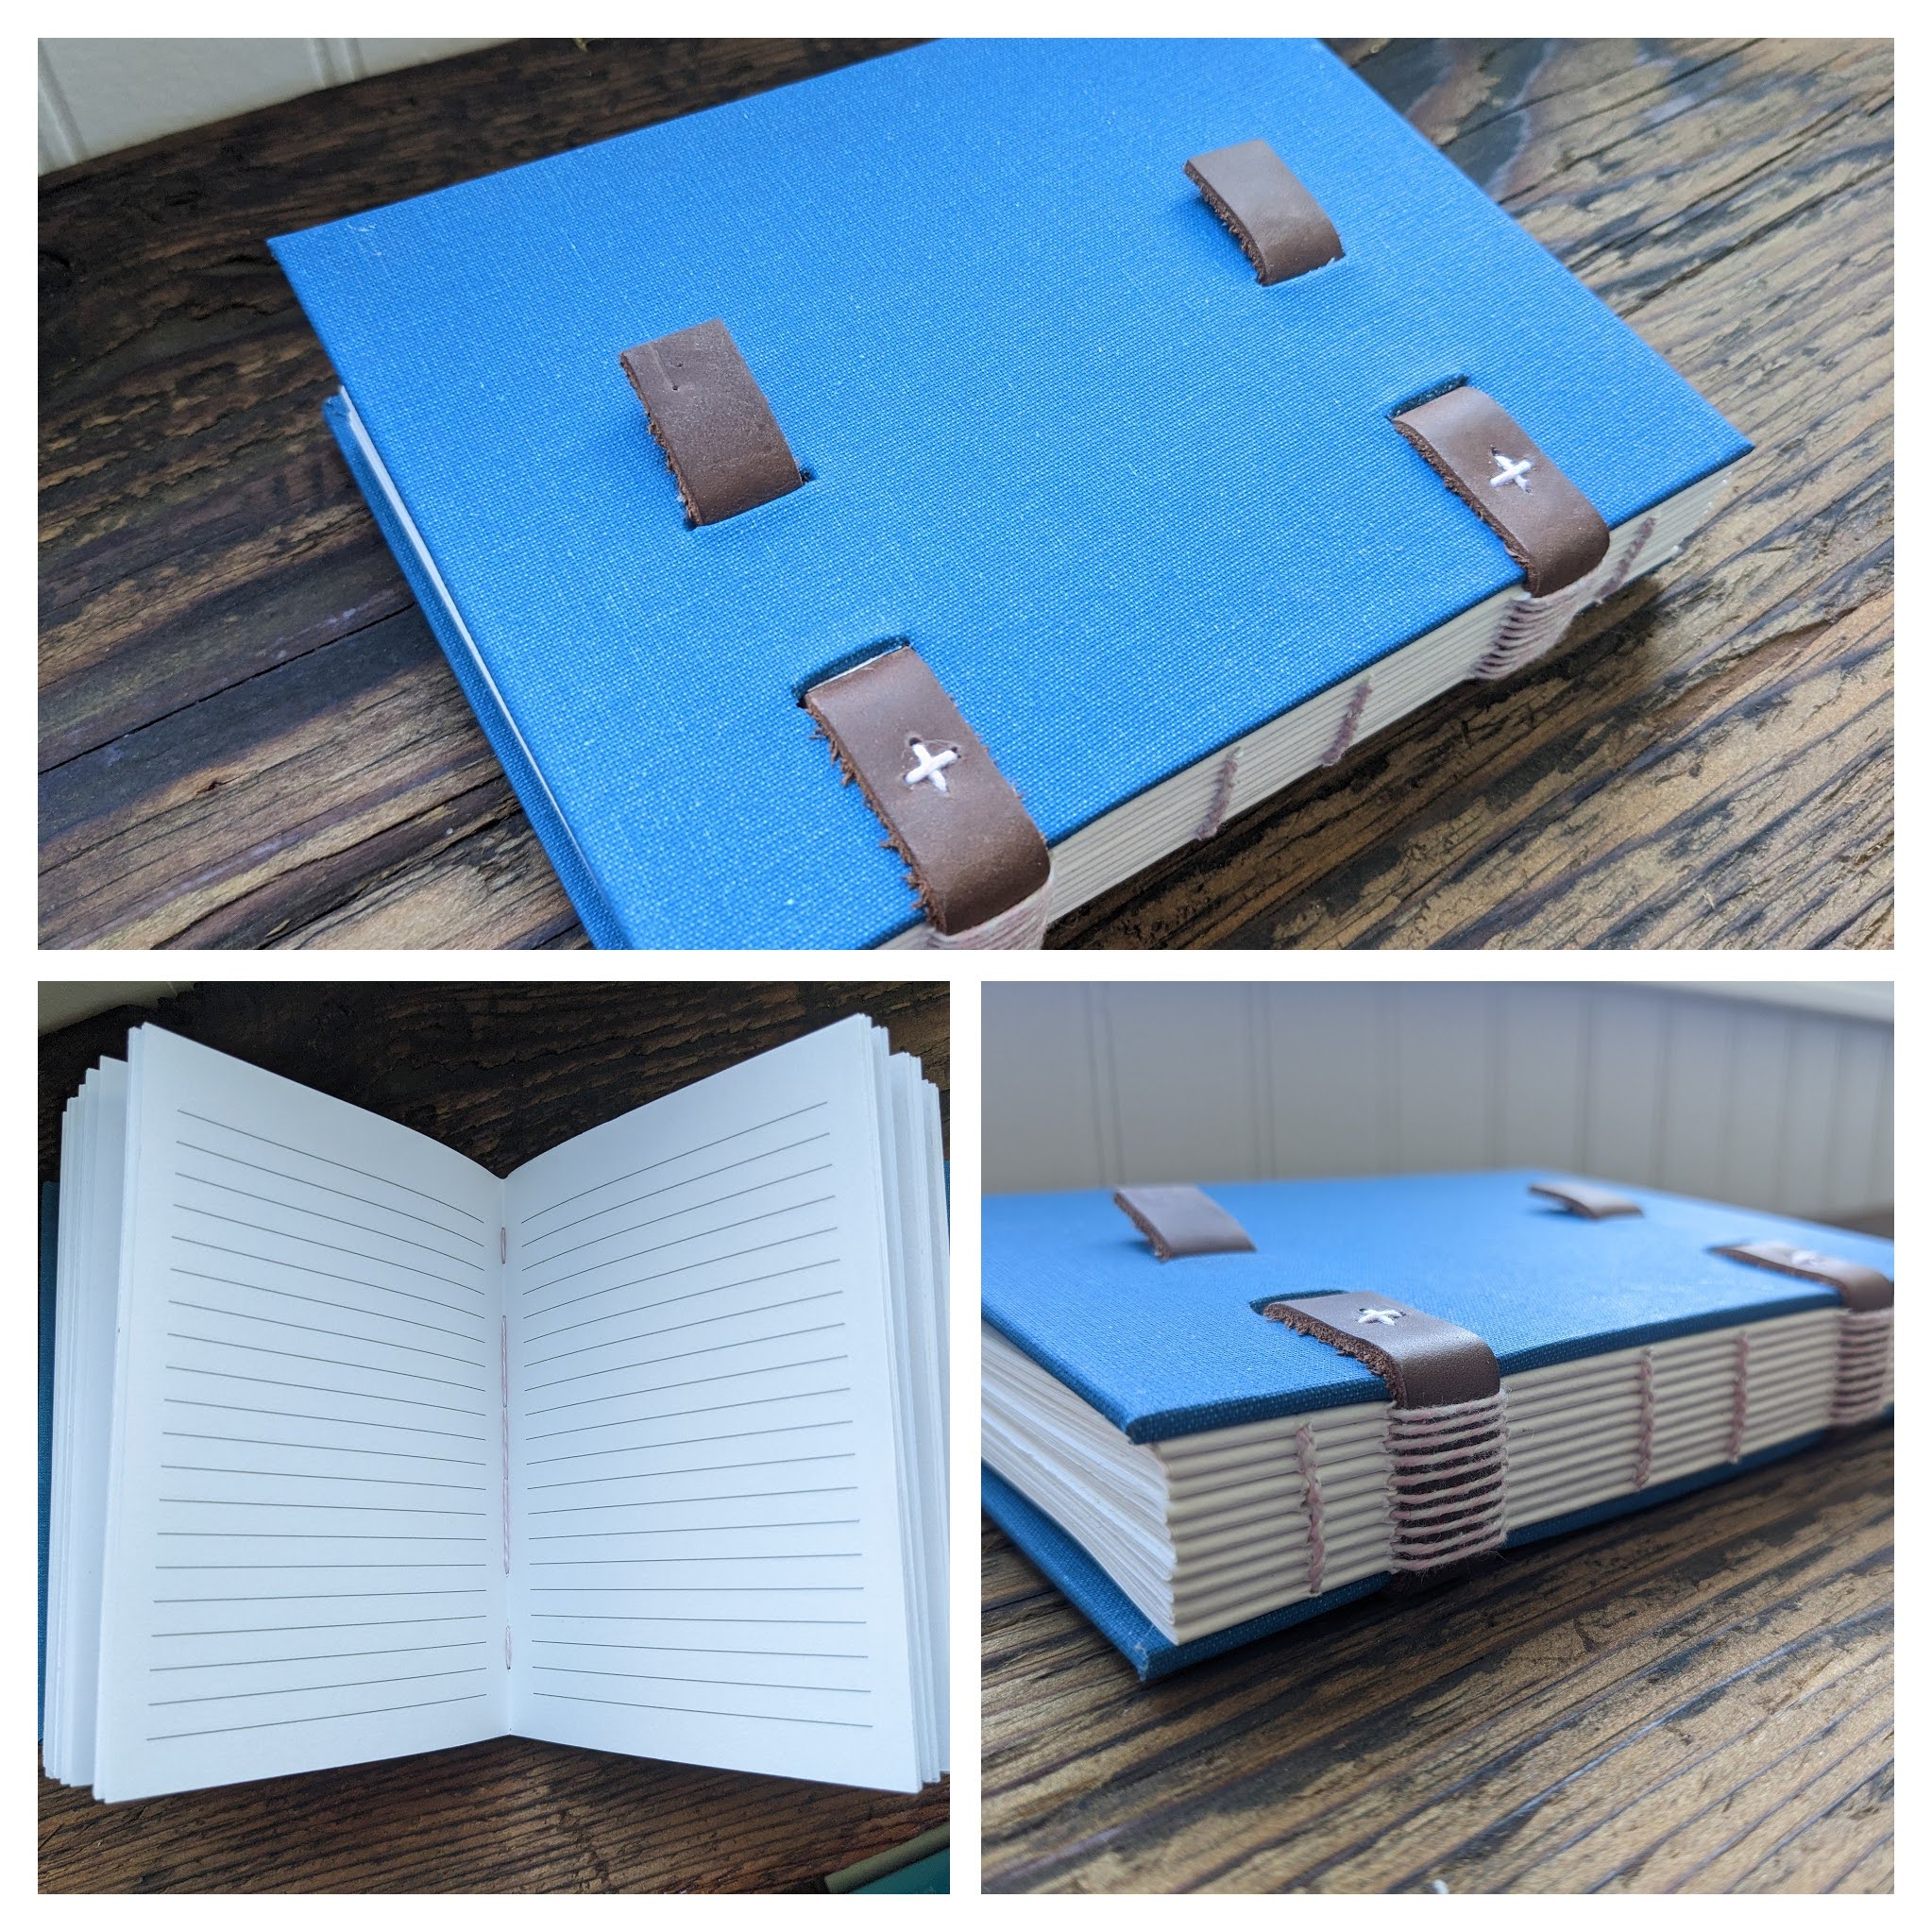 A 3-part collage showing a blue journal with leather straps woven into the covers.